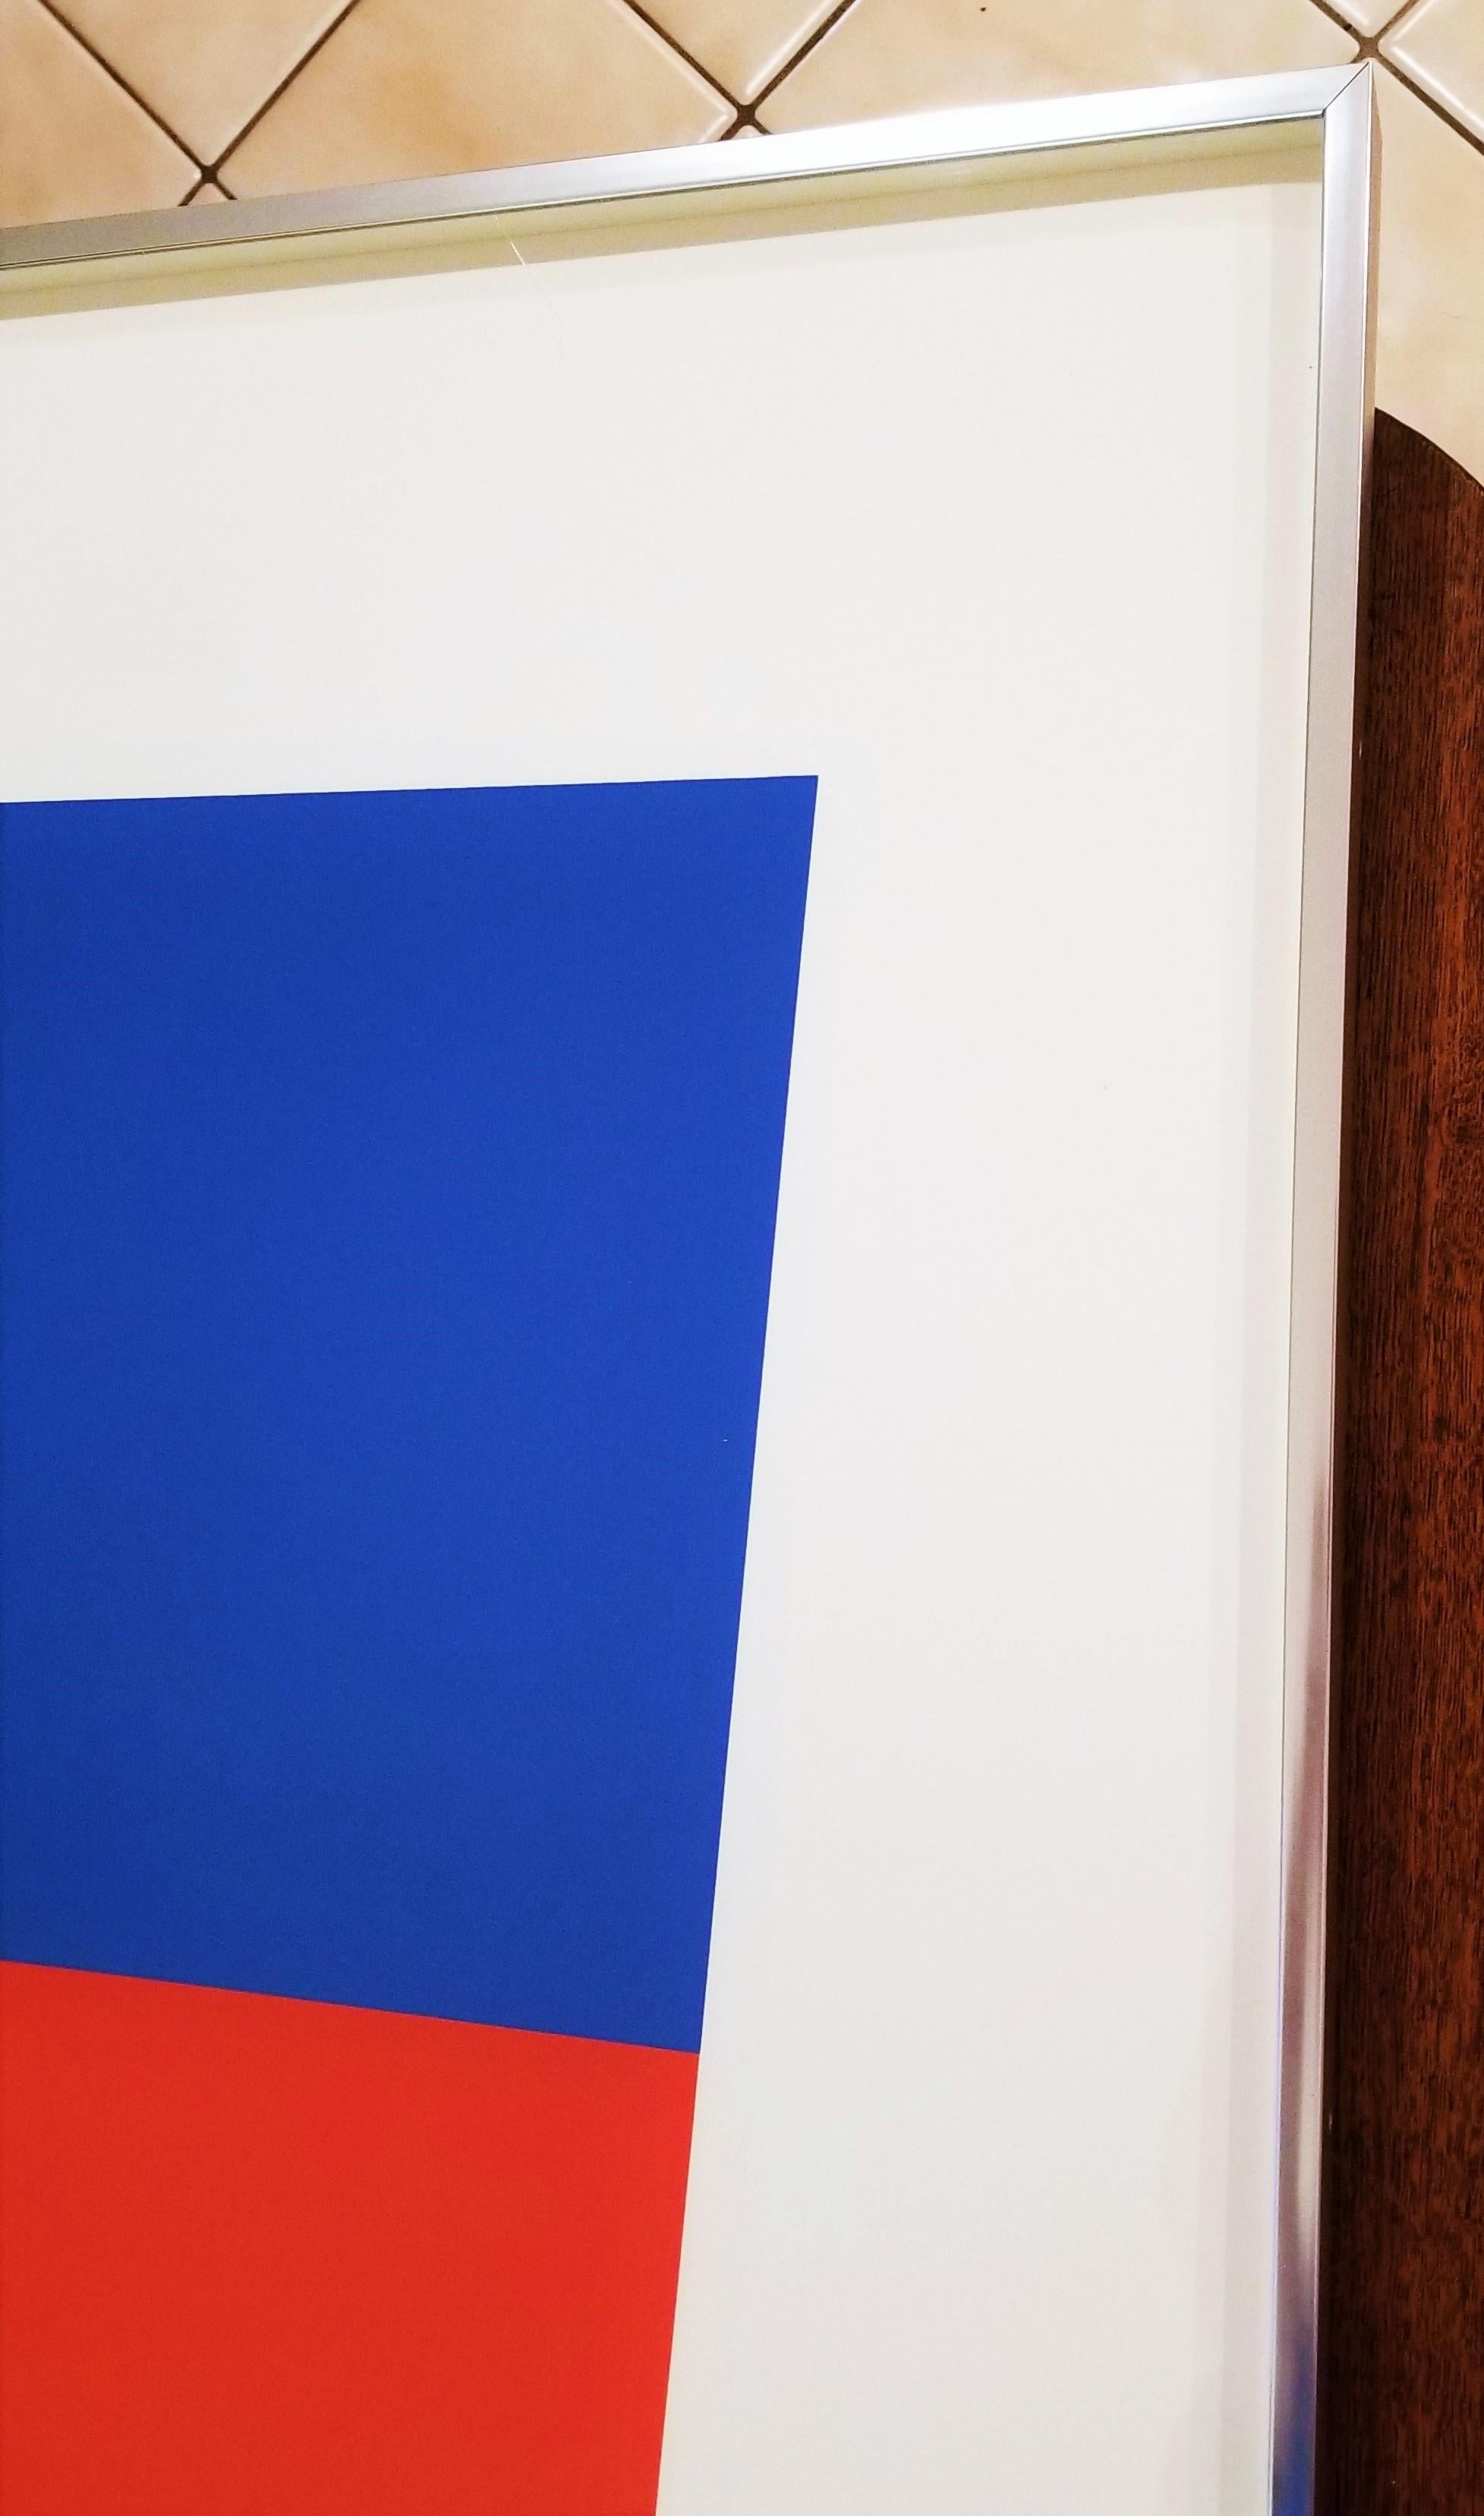 Artist: Ellsworth Kelly (American, 1923-2015)
Title: “Blue/Red-Orange”
*Signed by Kelly in pencil lower right
Year: 1972
Medium: Original Lithograph on Special Arjomari paper
Limited edition: 14/55, (there were also 9 artist's proofs)
Printer: